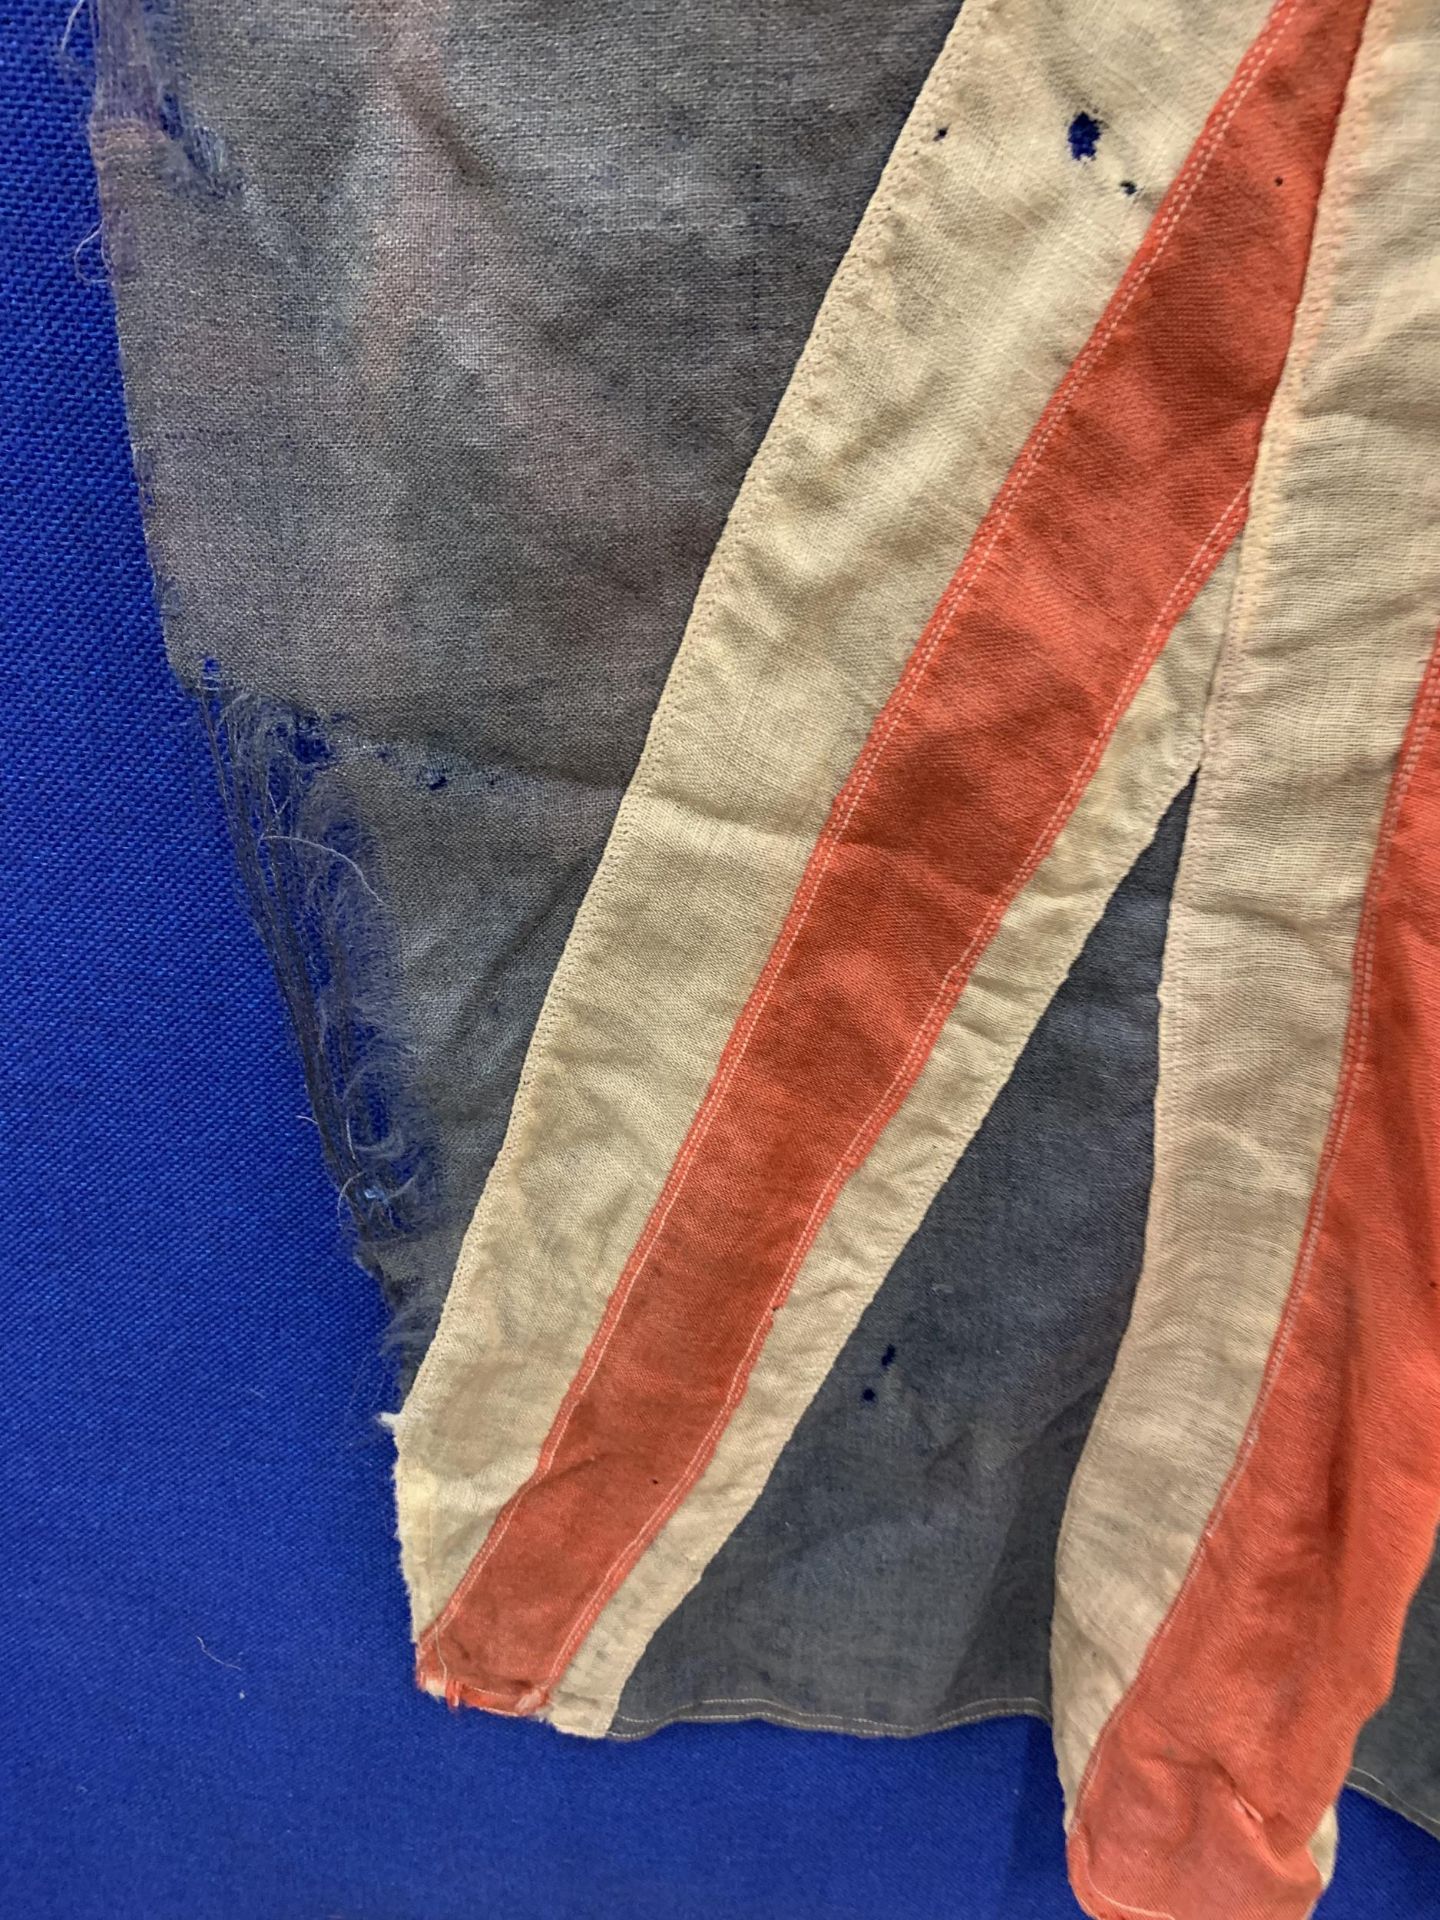 A 1918 WWI GREAT BRITAIN UNION JACK FLAG - Image 3 of 3